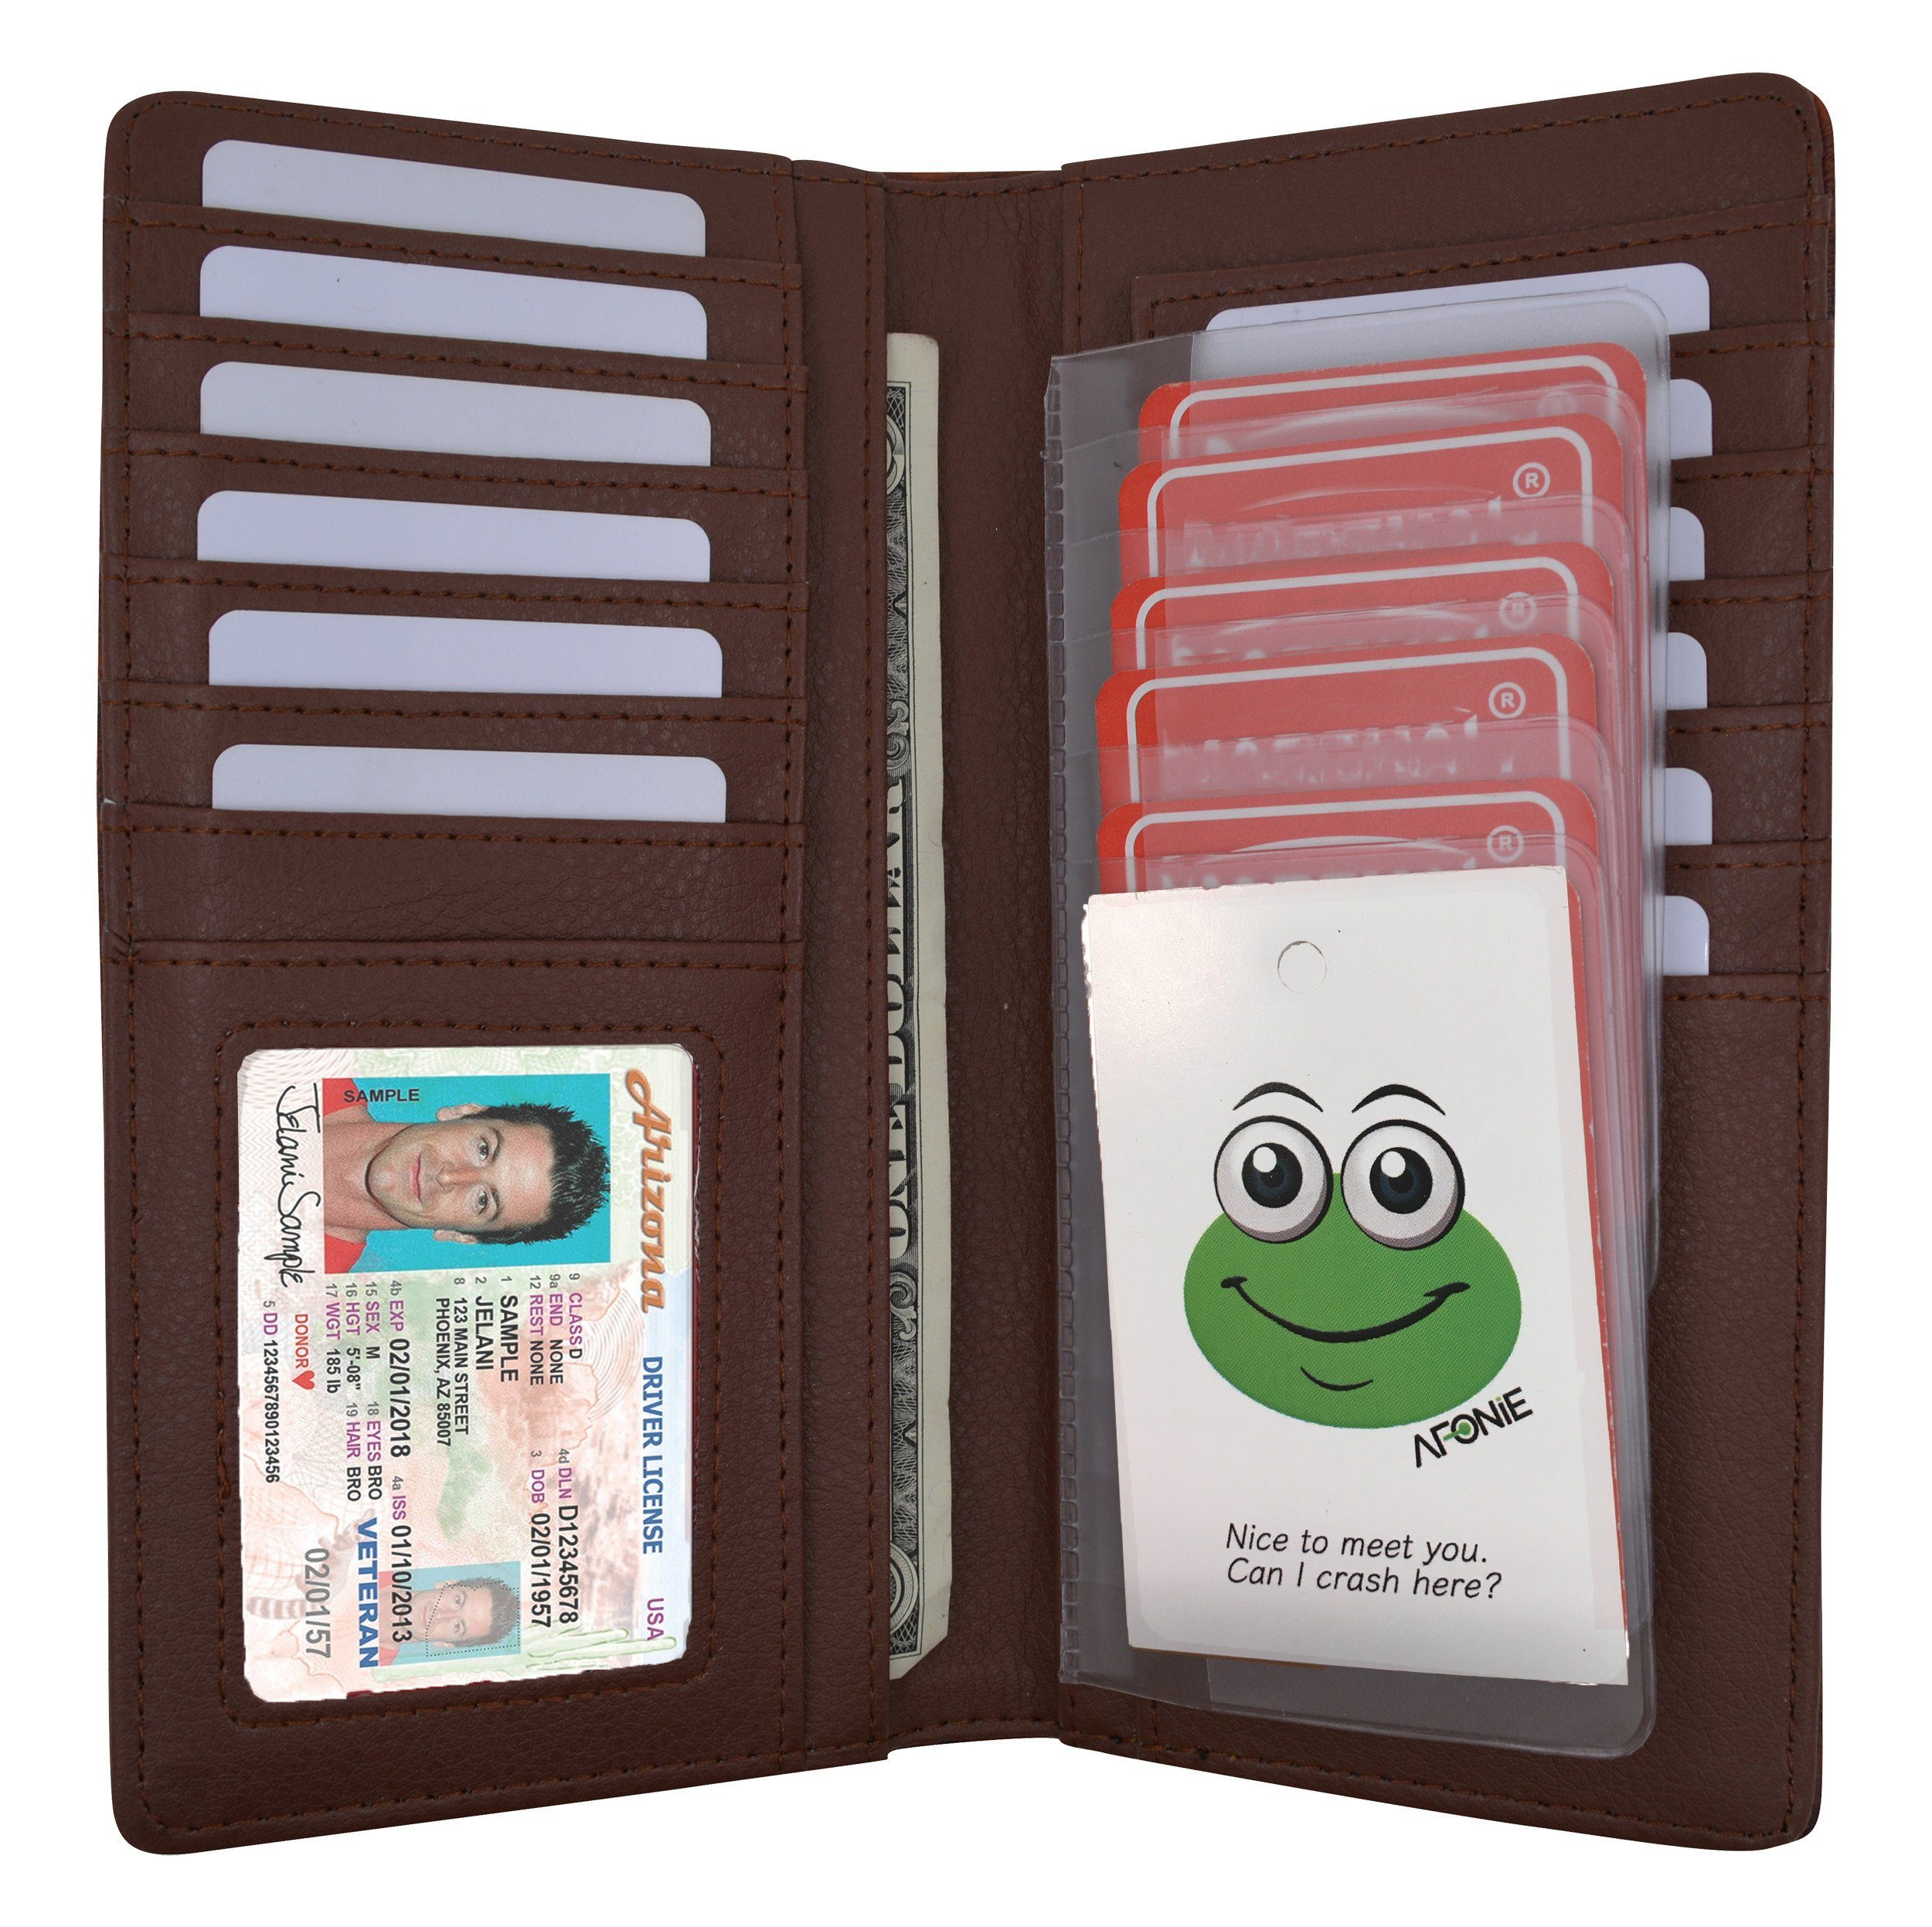 Western Embroidery Credit Card/Chackbook Brown Color Wallet